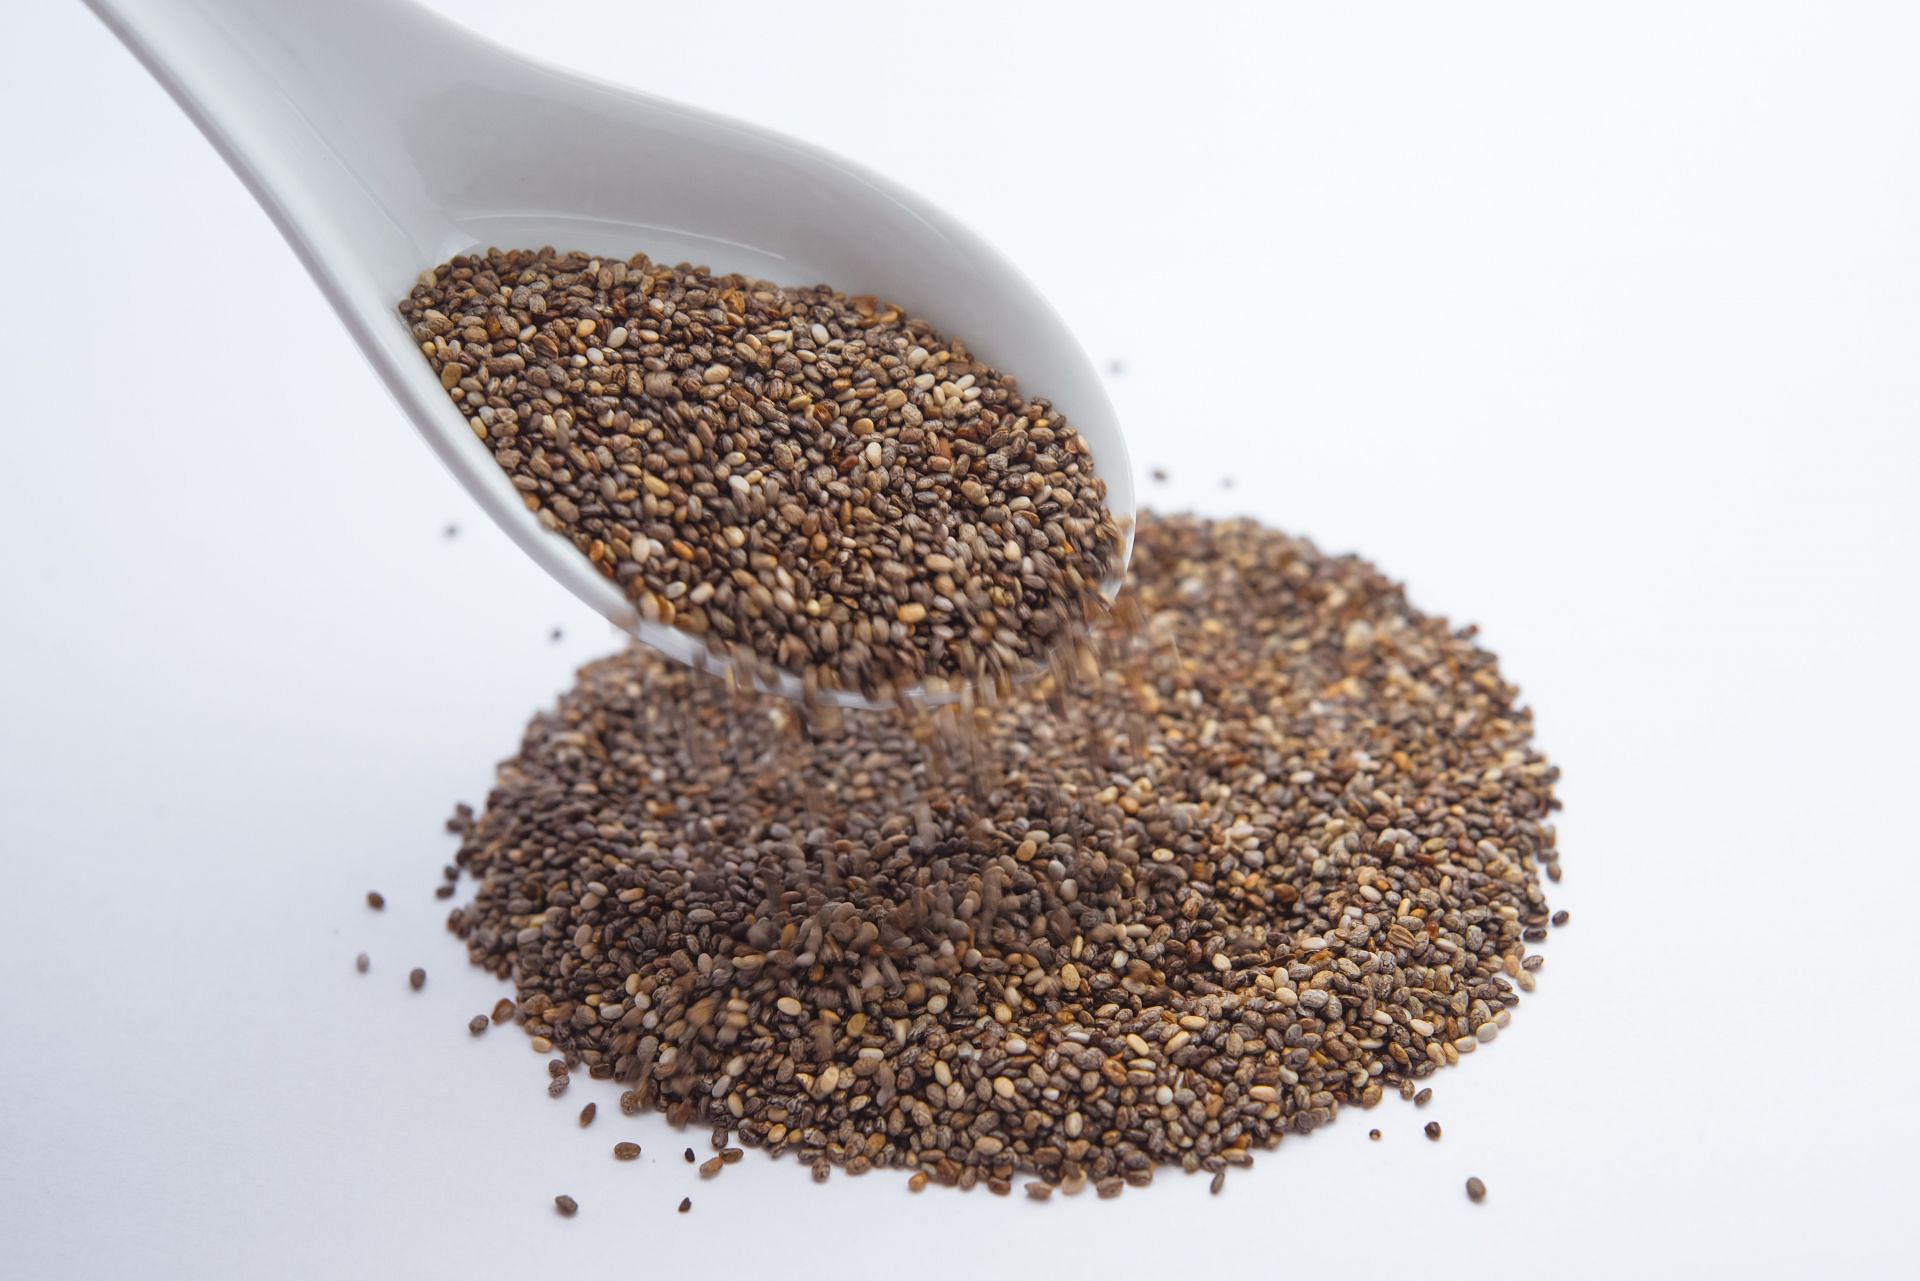 Side effects of eating too many chia seeds (image sourced via Pexels / Photo by Bruno Scramgnon)